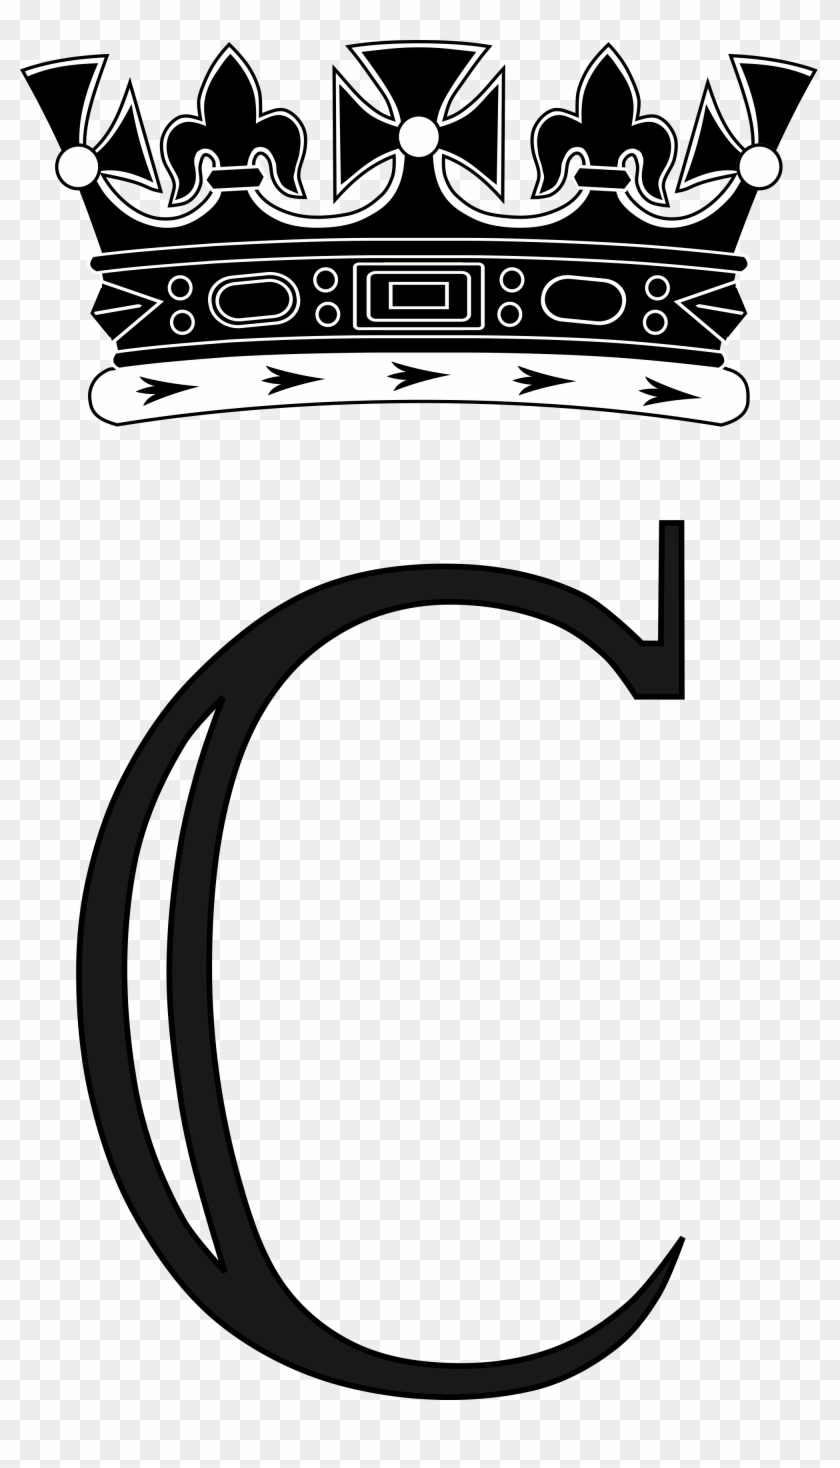 Picture Royalty Free Stock File Royal Monogram Of Charles - William And Kate Joint Monogram #1709226